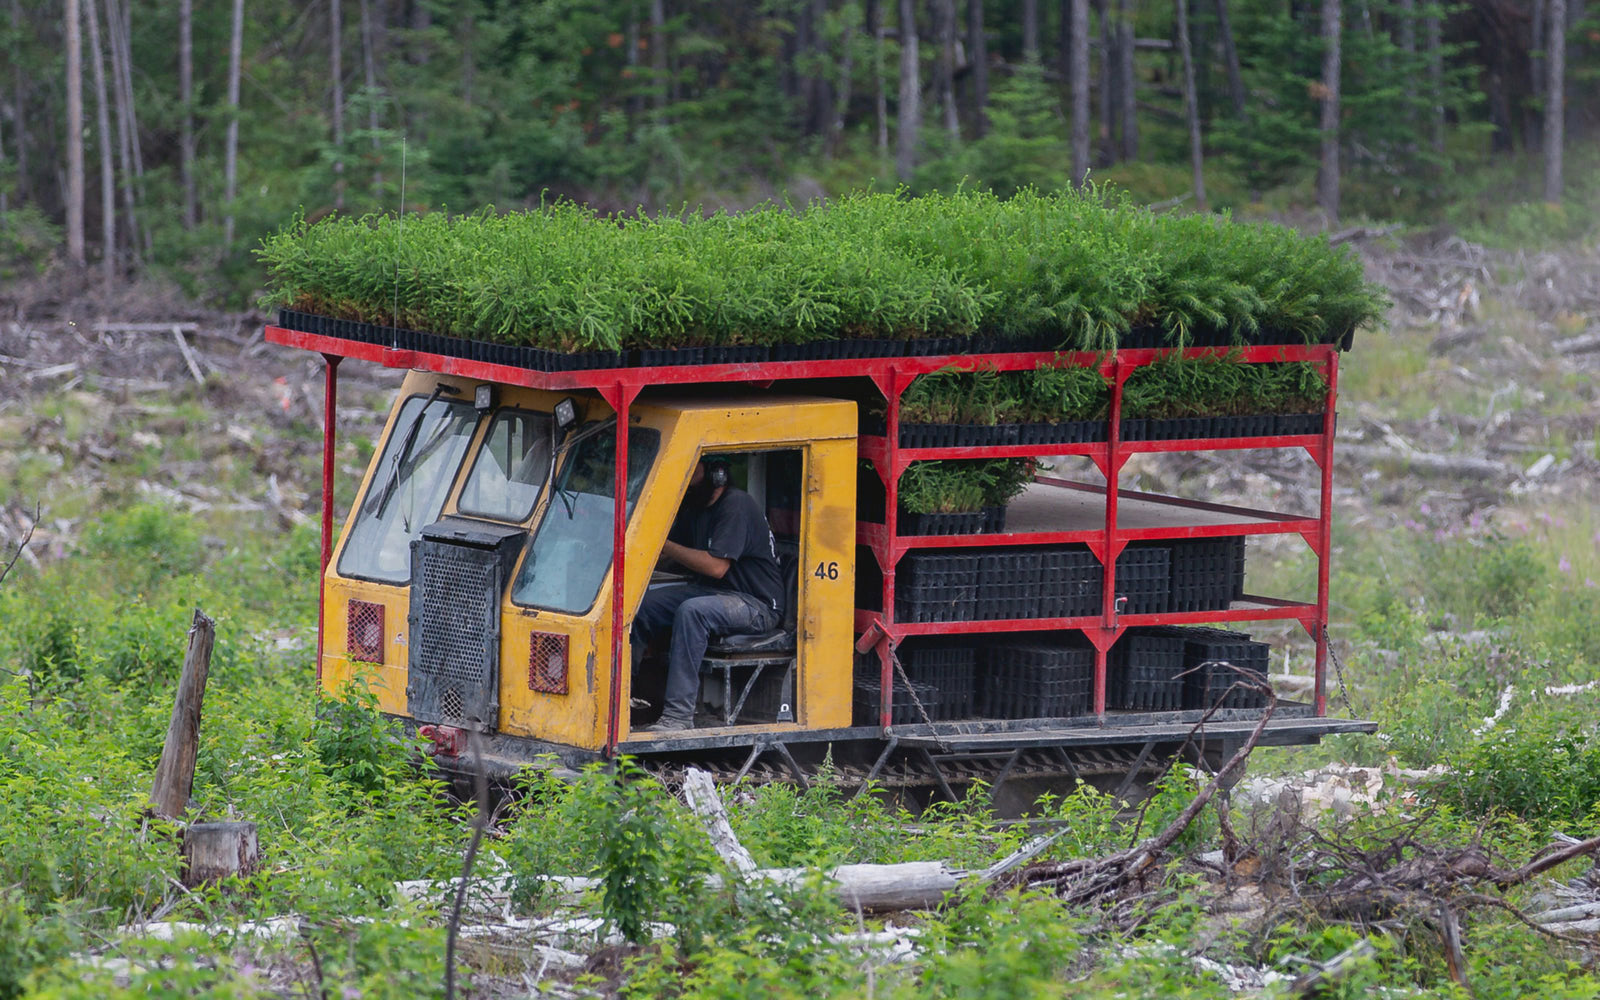 Truck with tree saplings